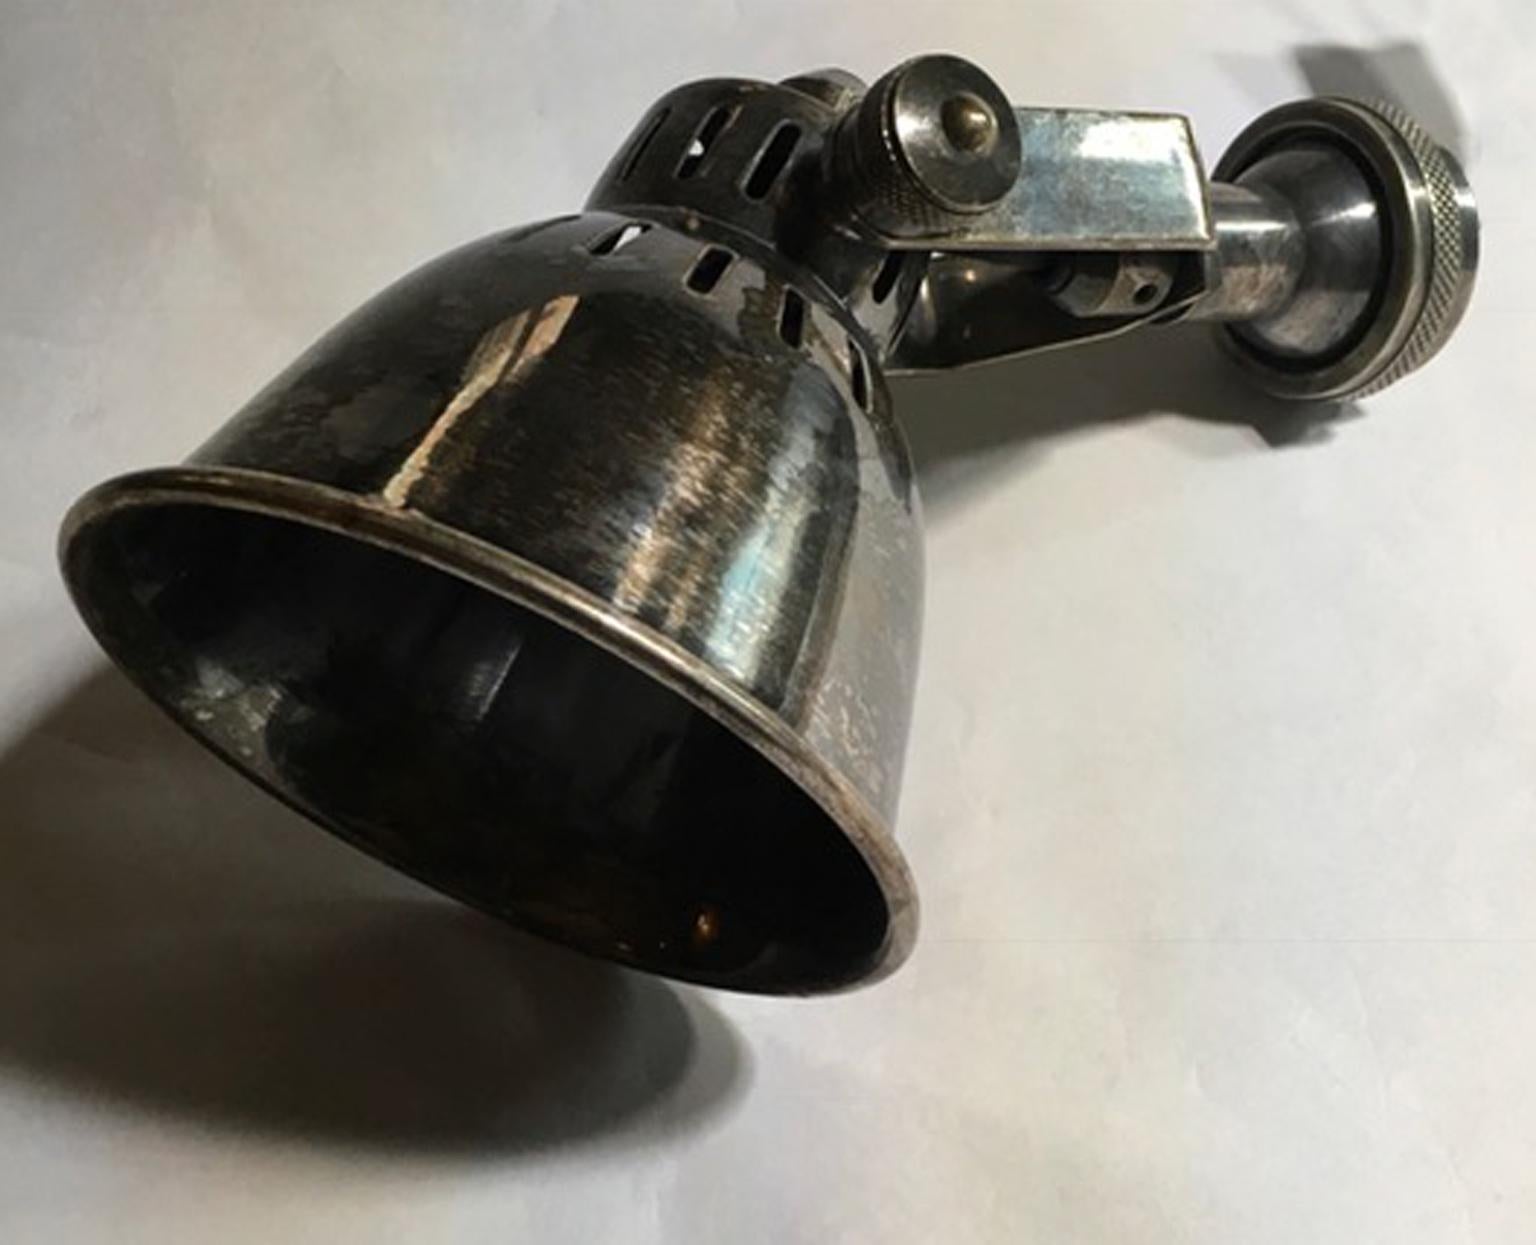 Italian design iron wall sconce in industrial style contemporary production in ralph Lauren style.

The sconce is in the finish like a 